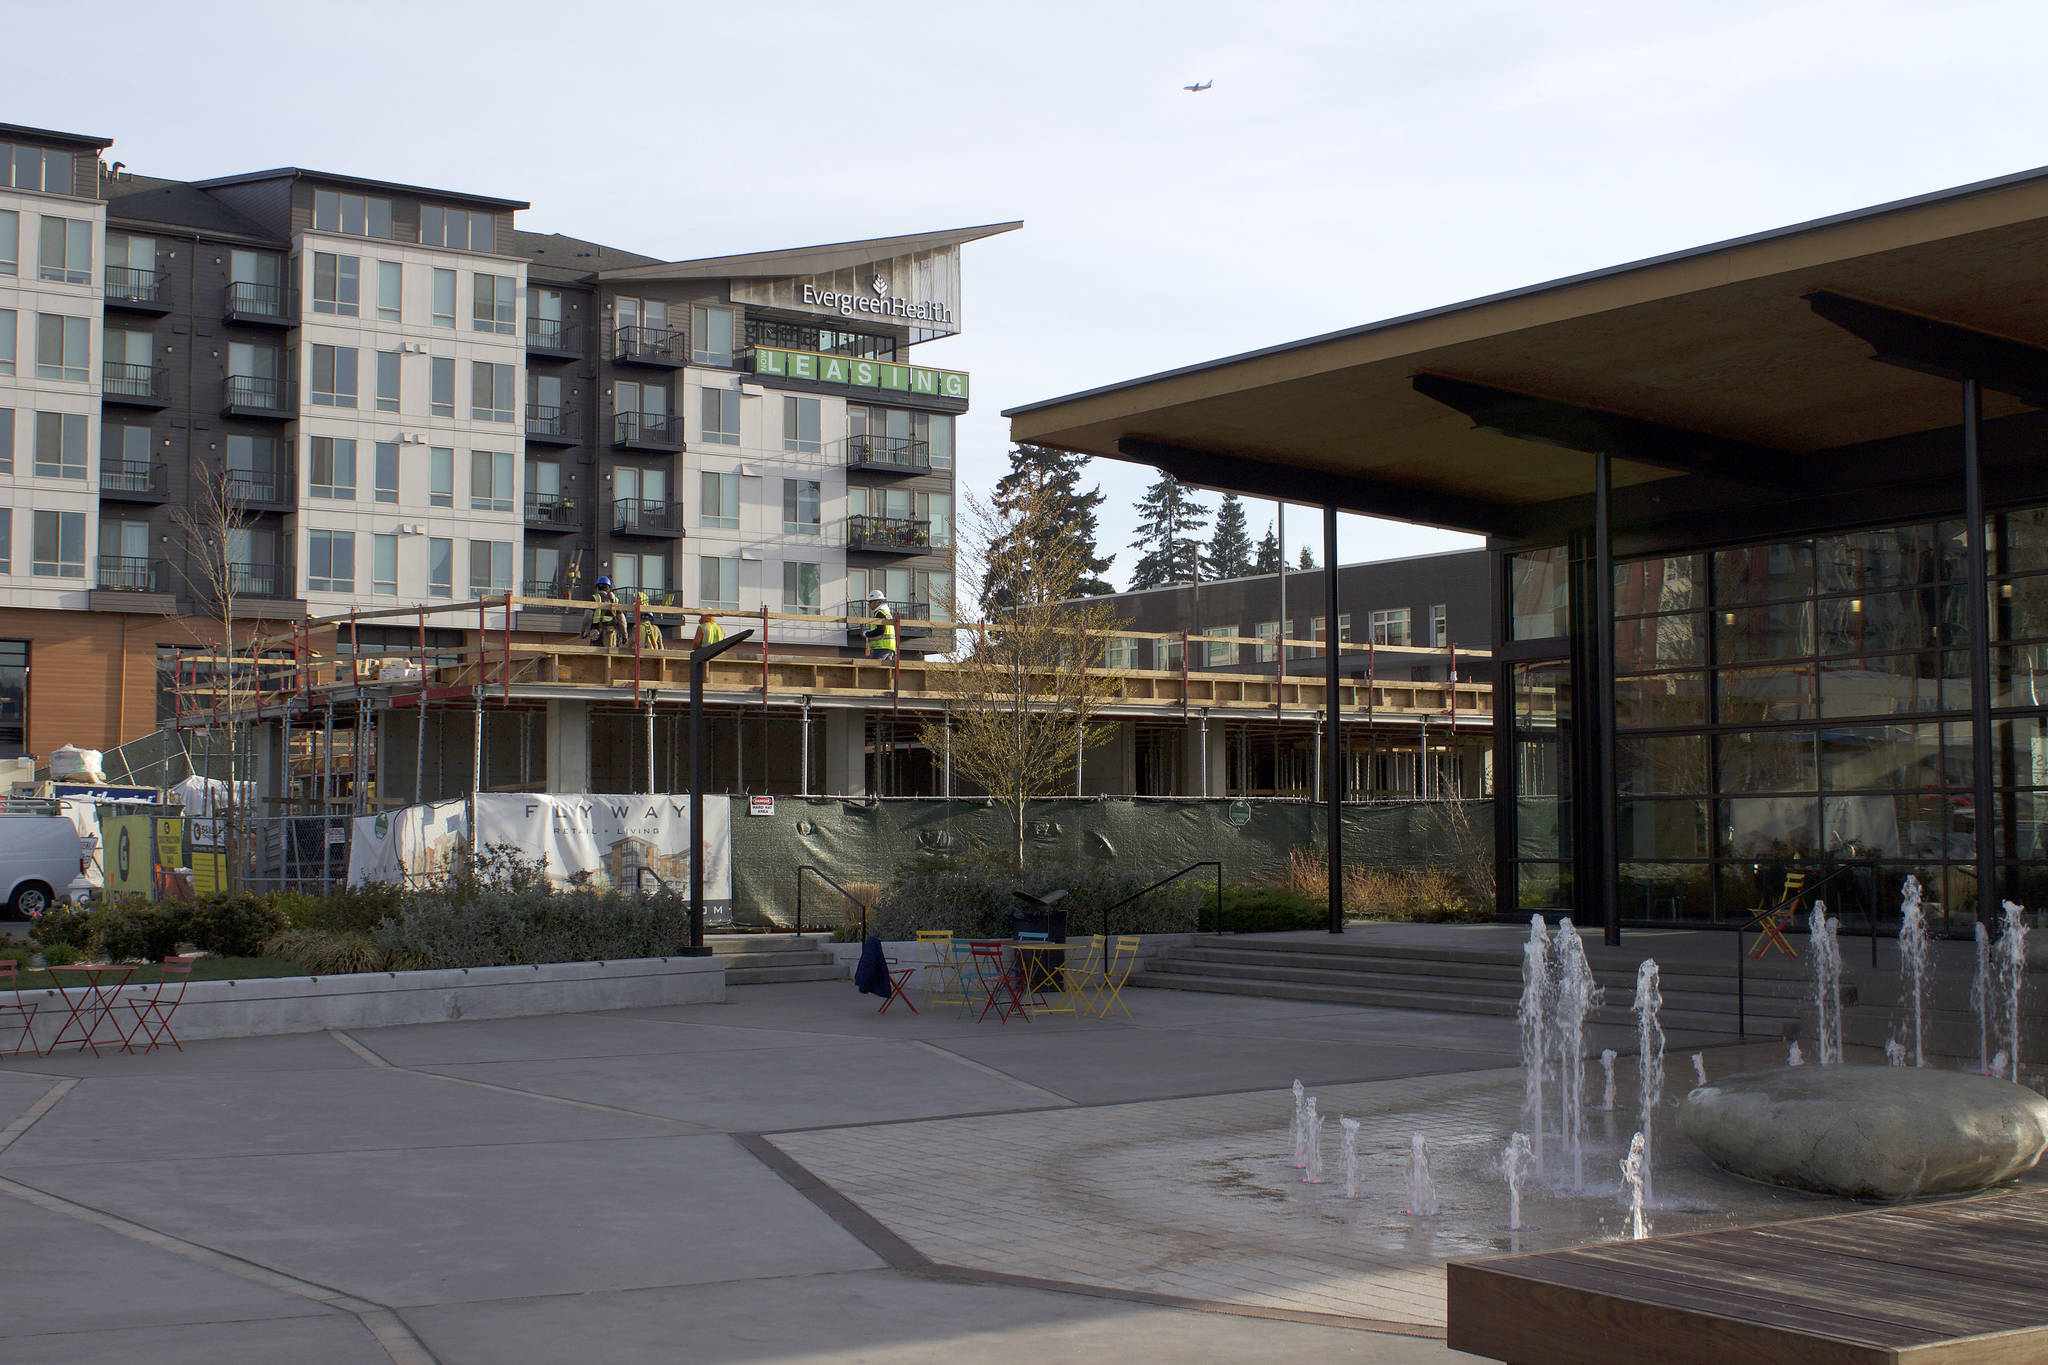 Bothell and Kenmore have seen numerous develops recently including the new mixed-use Flyway in Kenmore and a unique business aimed at helping locals get started on their hobbies called “Just Get Me Started”. Courtesy photo